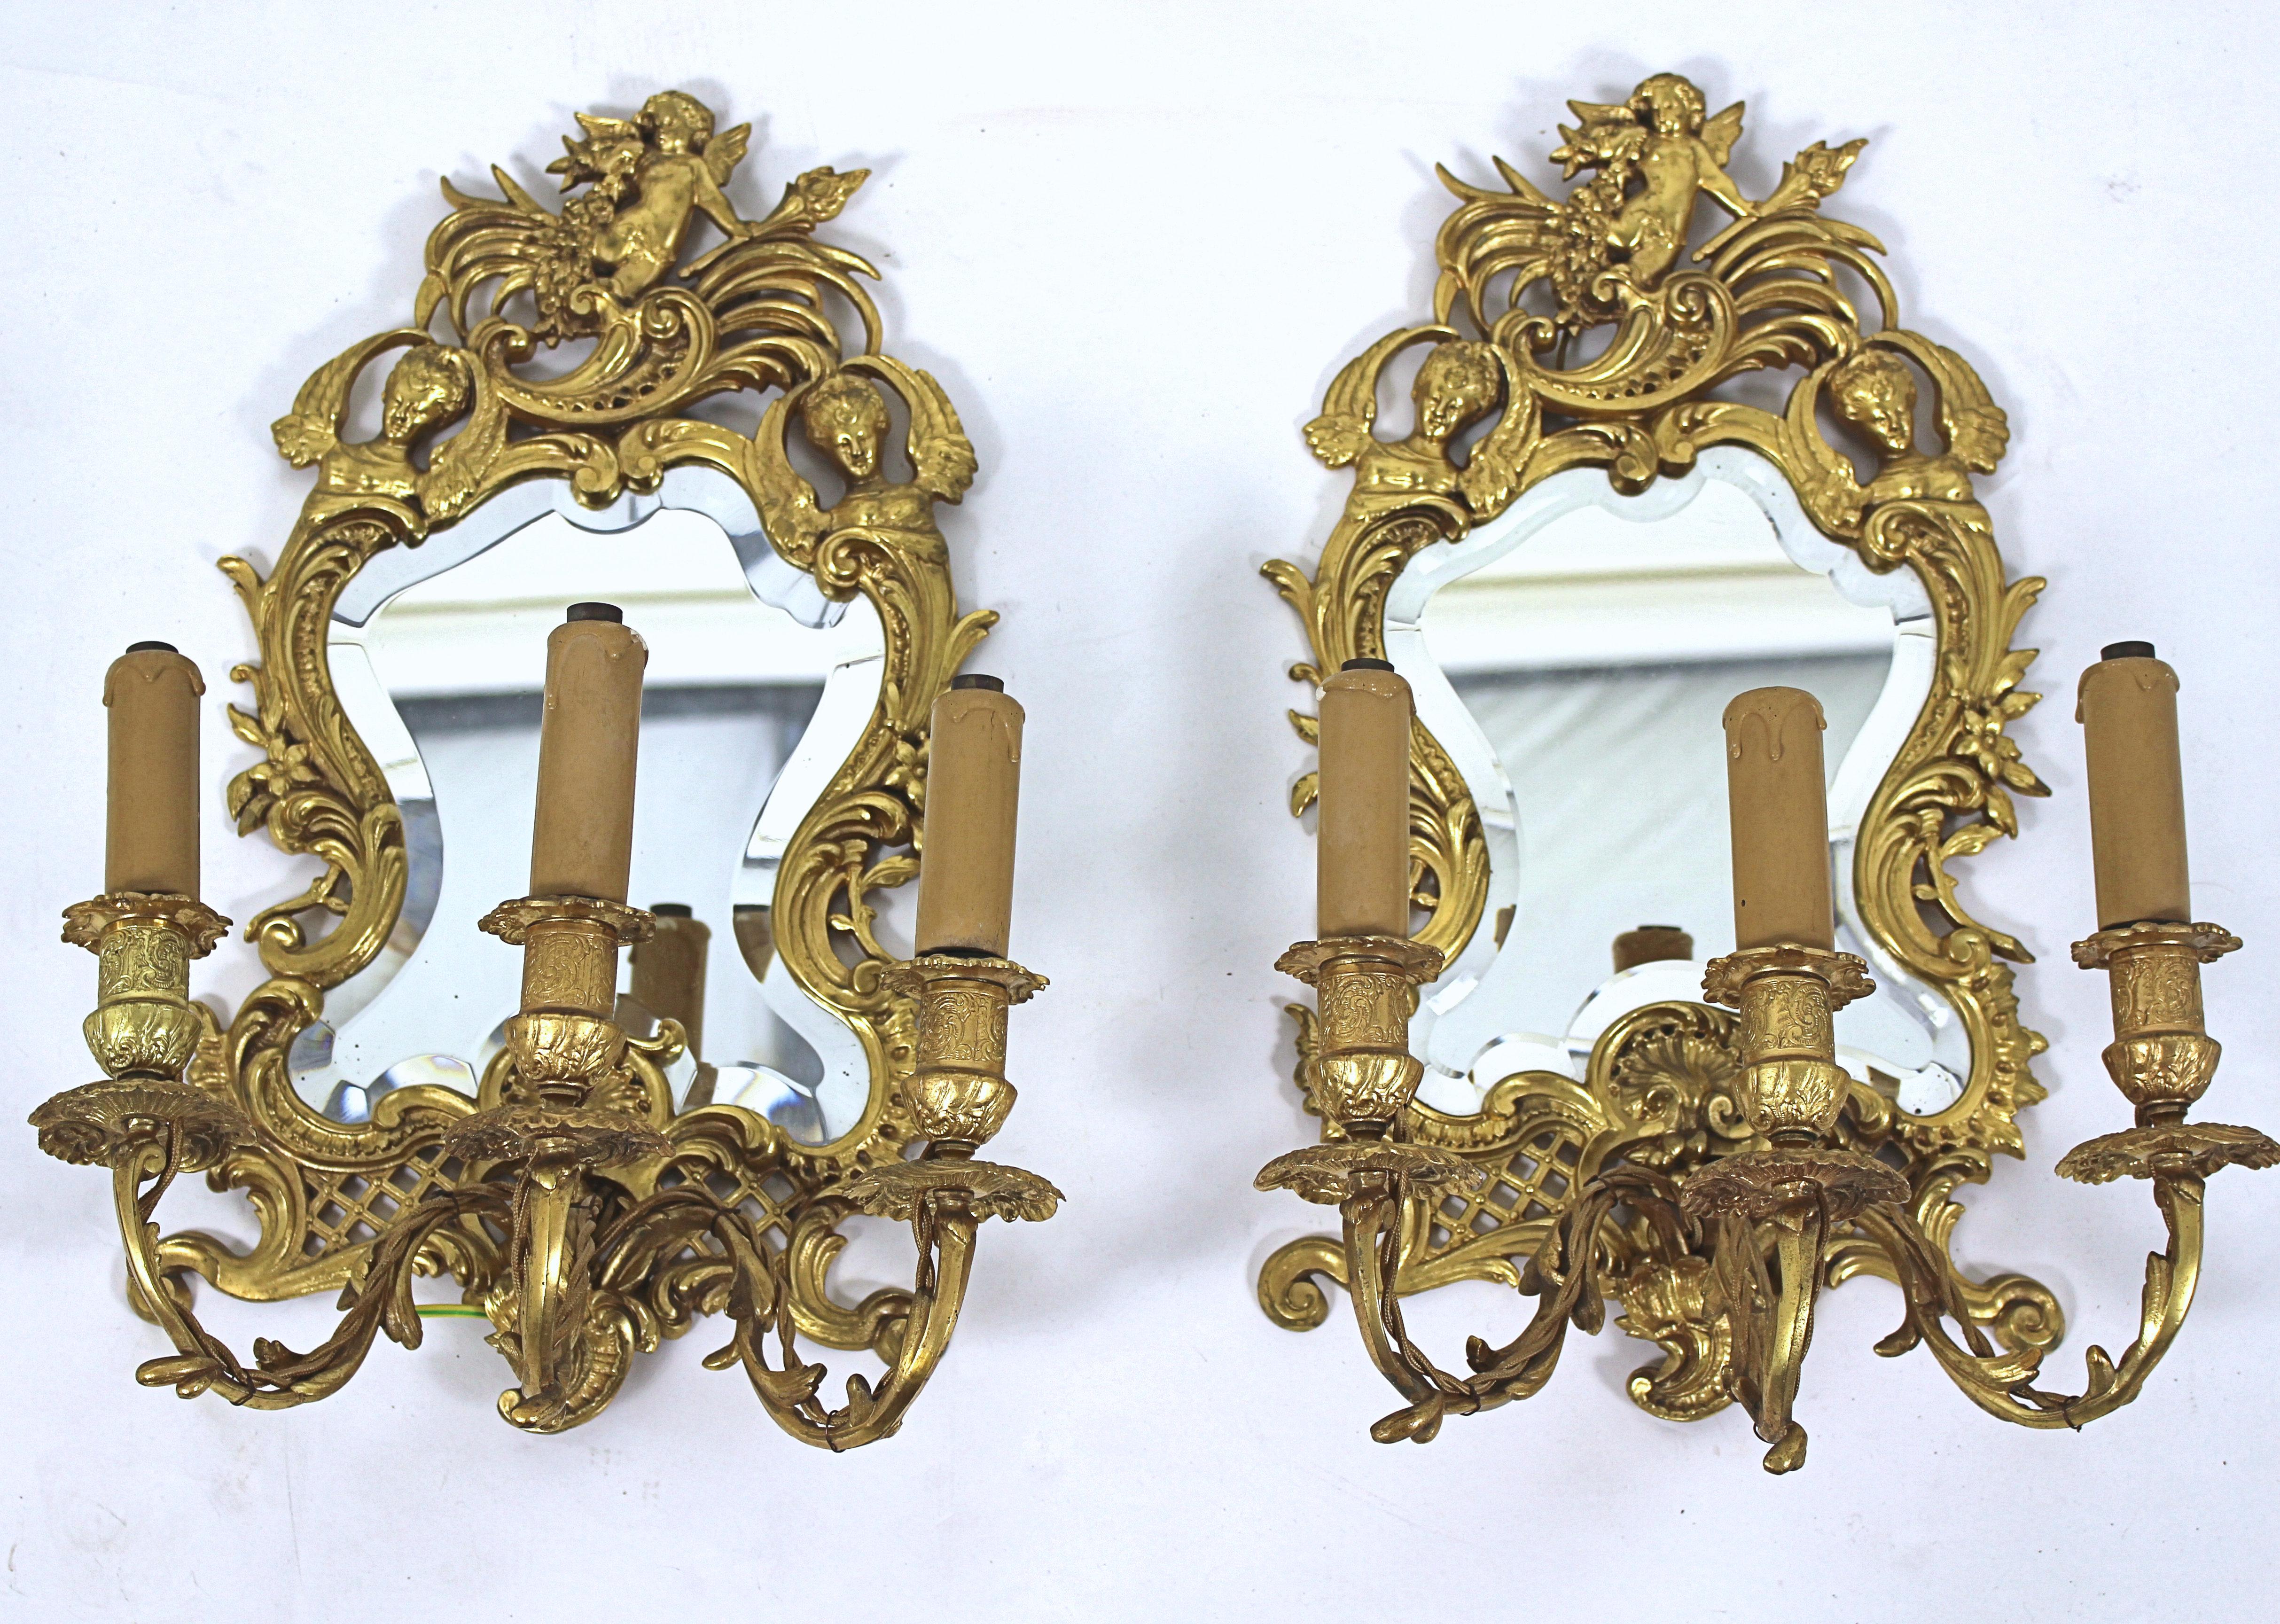 Pair of 19th Century French Ormolu Girondelles For Sale 4